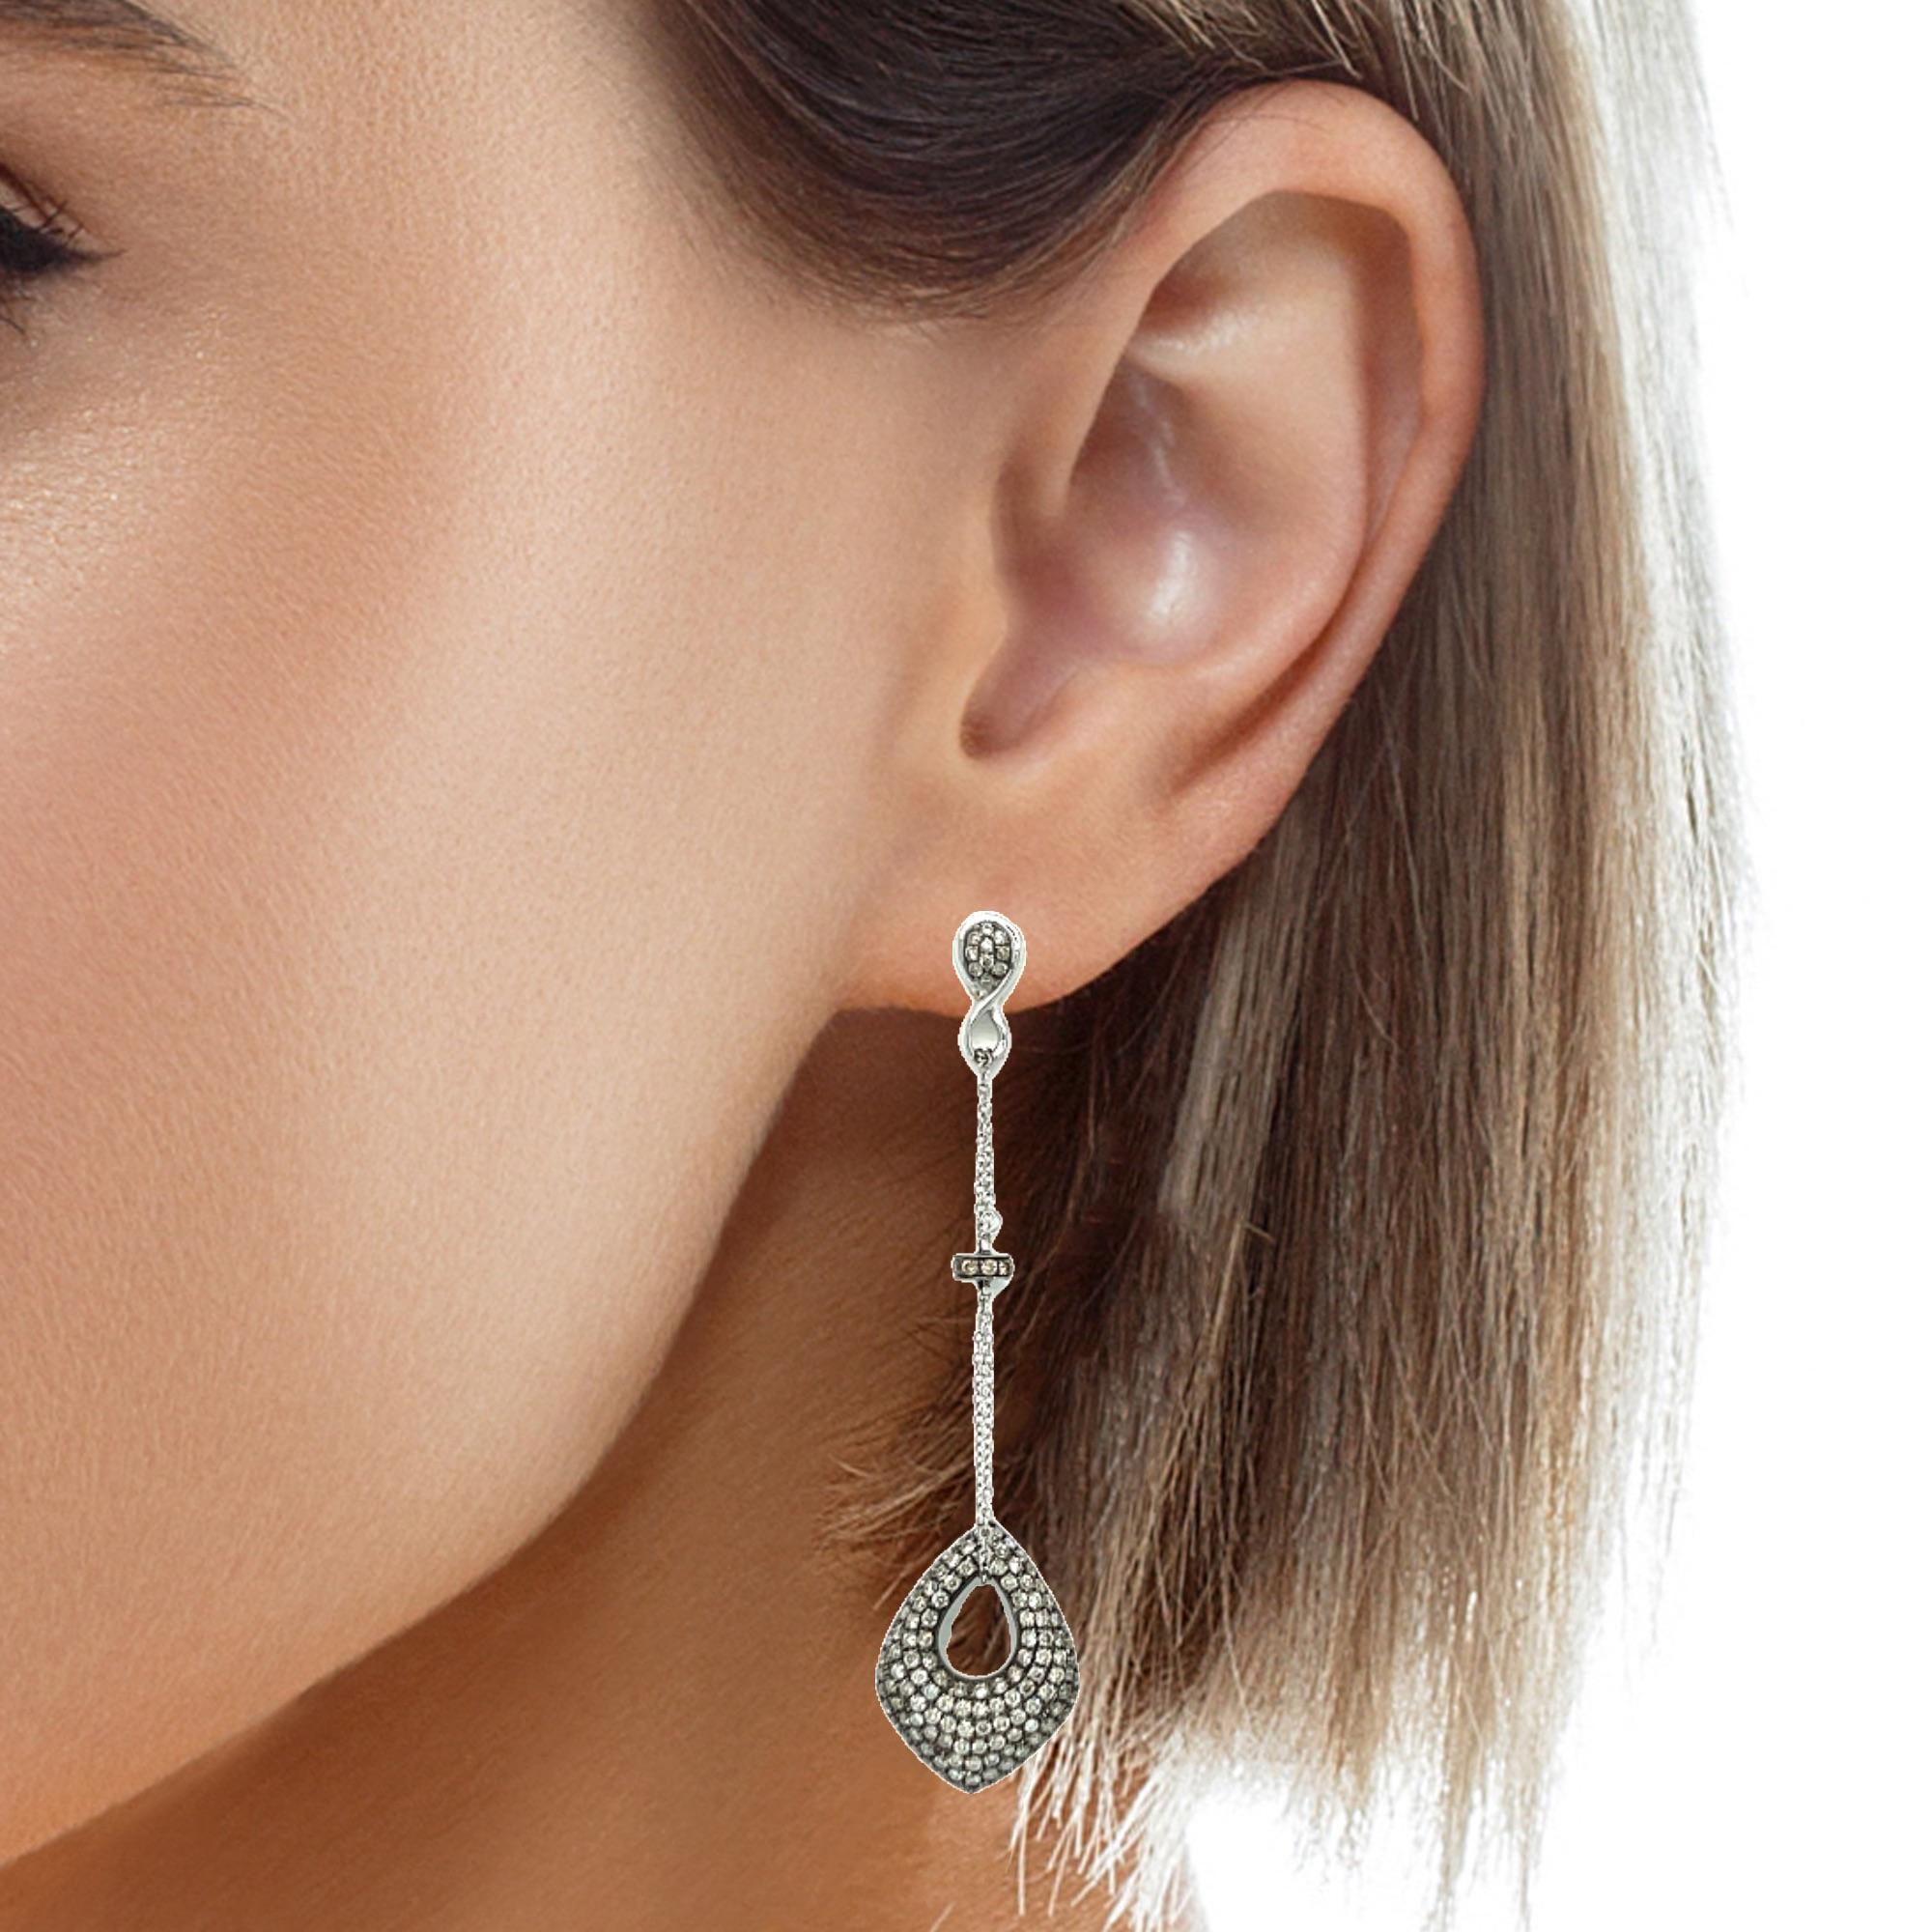 These stunning dangling earrings are surrounded with fancy Champagne and White diamonds and set in 18K gold. They are the perfect accessory for your cocktail event. They have double lock closure for extra security. These earrings come in a beautiful